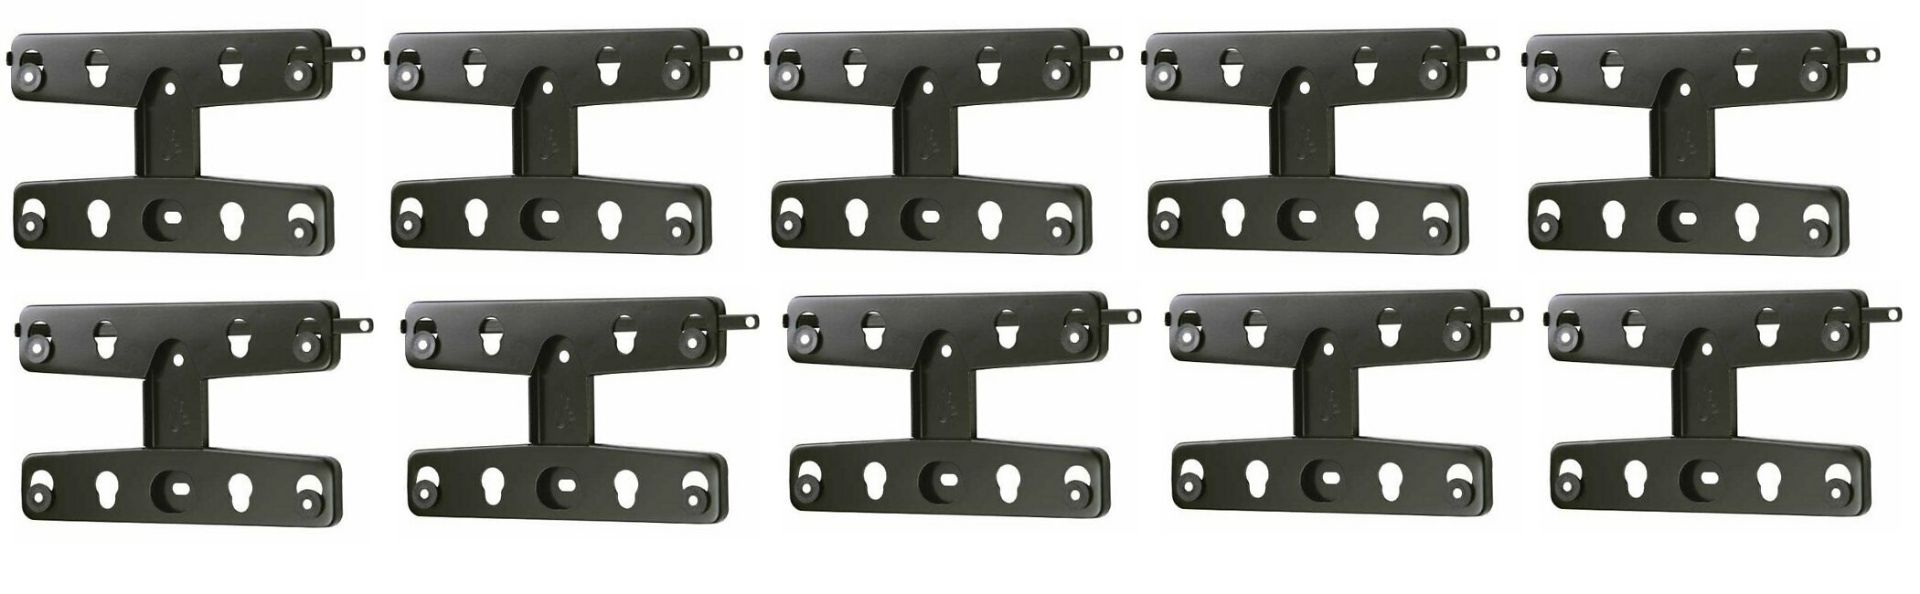 V Brand New 10 Secura Low Profile Ultra Slim TV Wall Mounts For Models 13"-26" - Online Price £280.